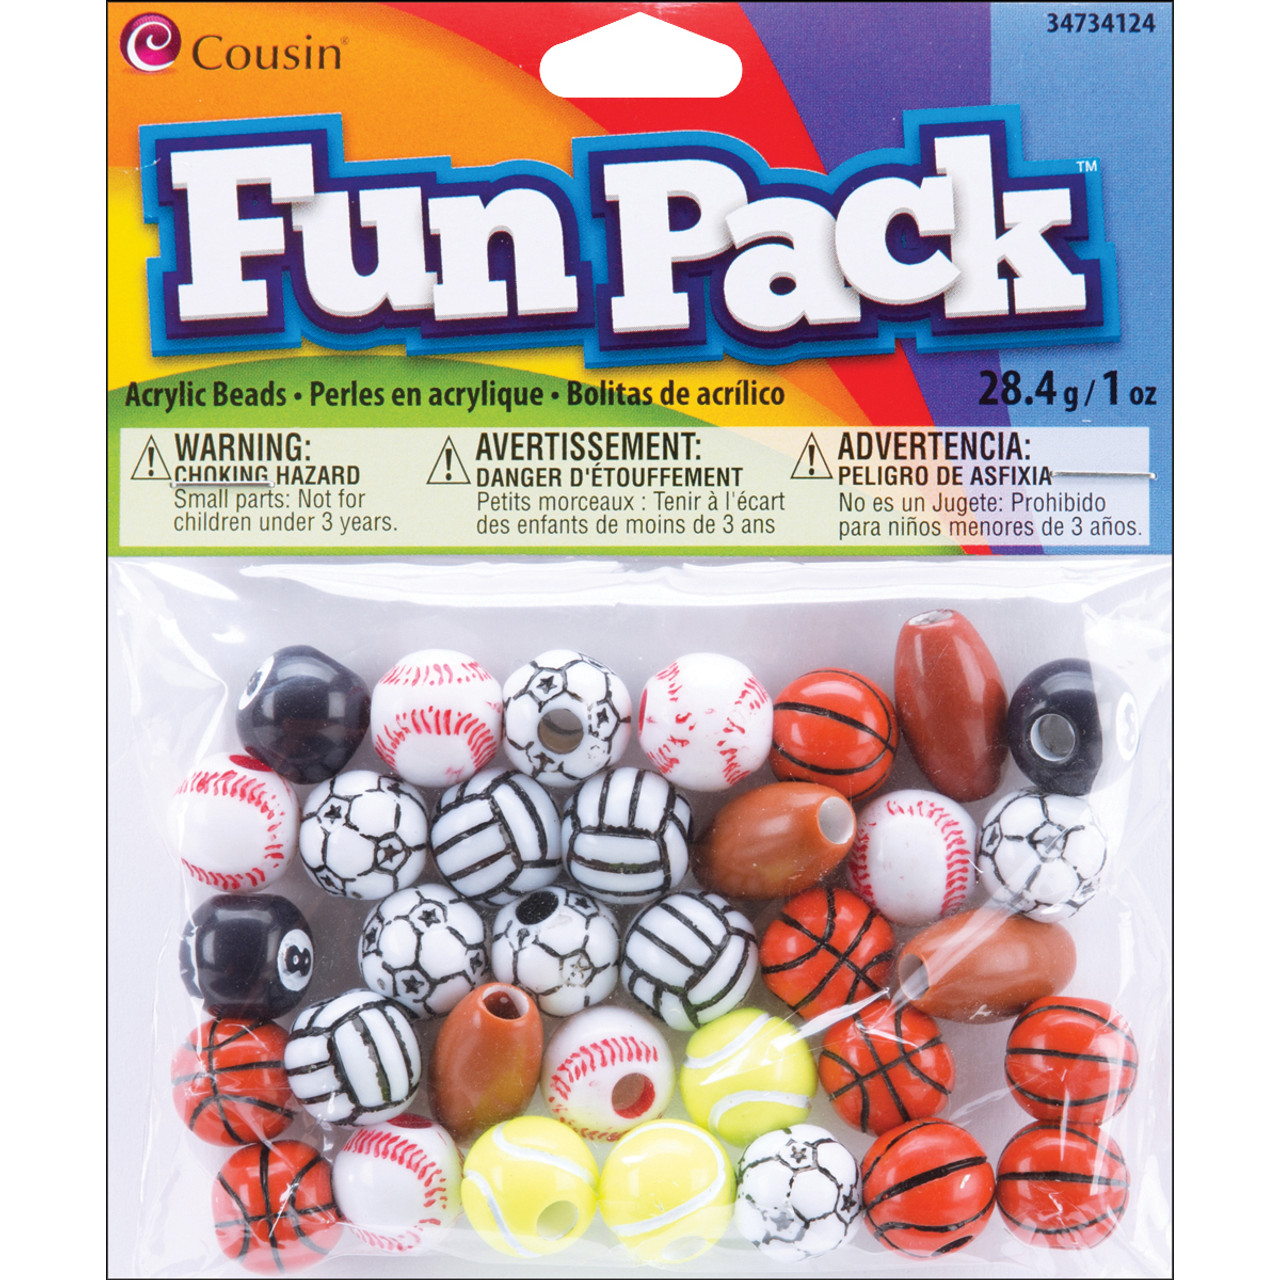 6 Pack Cousin Fun Pack Acrylic Sports Beads 1oz-Assorted Balls 34734124 -  GettyCrafts